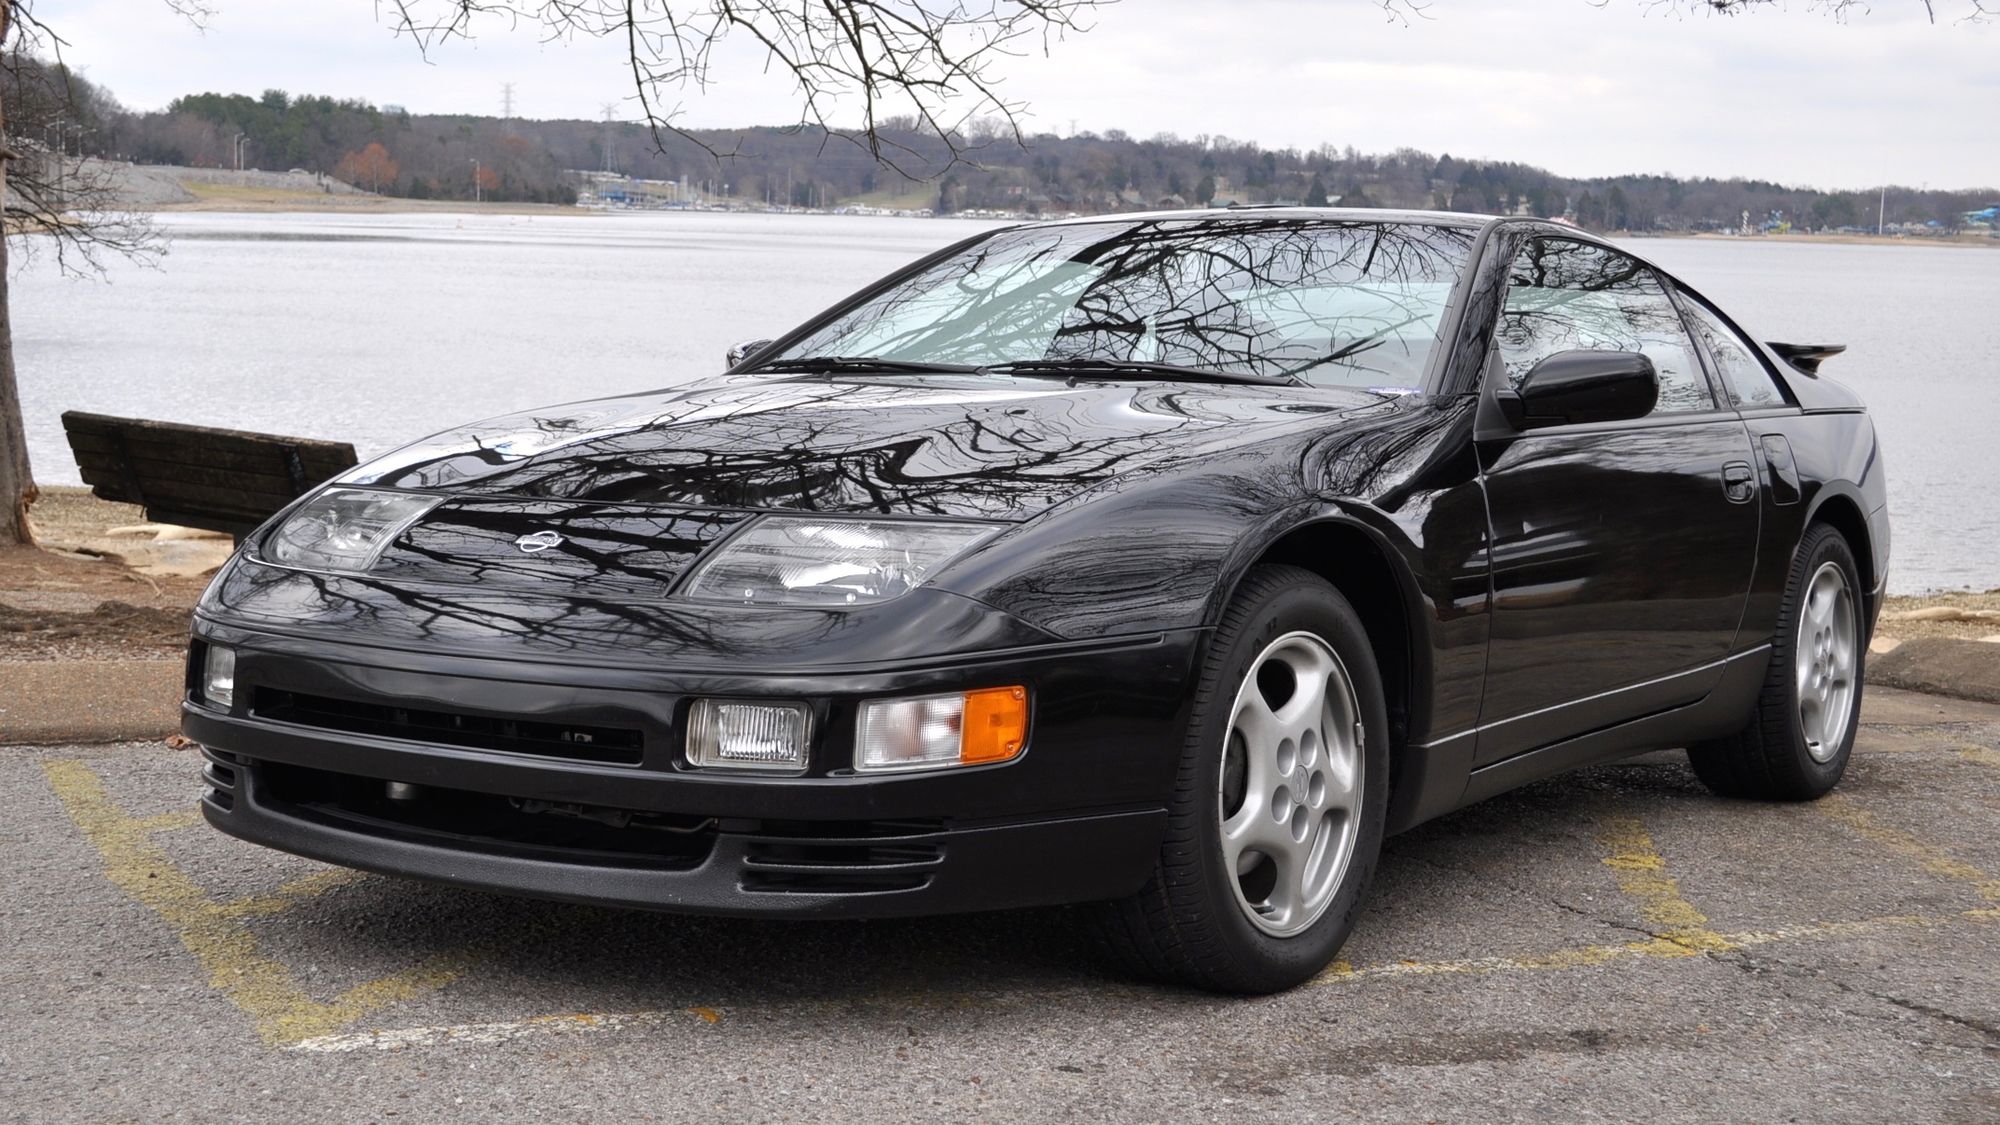 The 300zx was a high performance and high luxury car from Japan